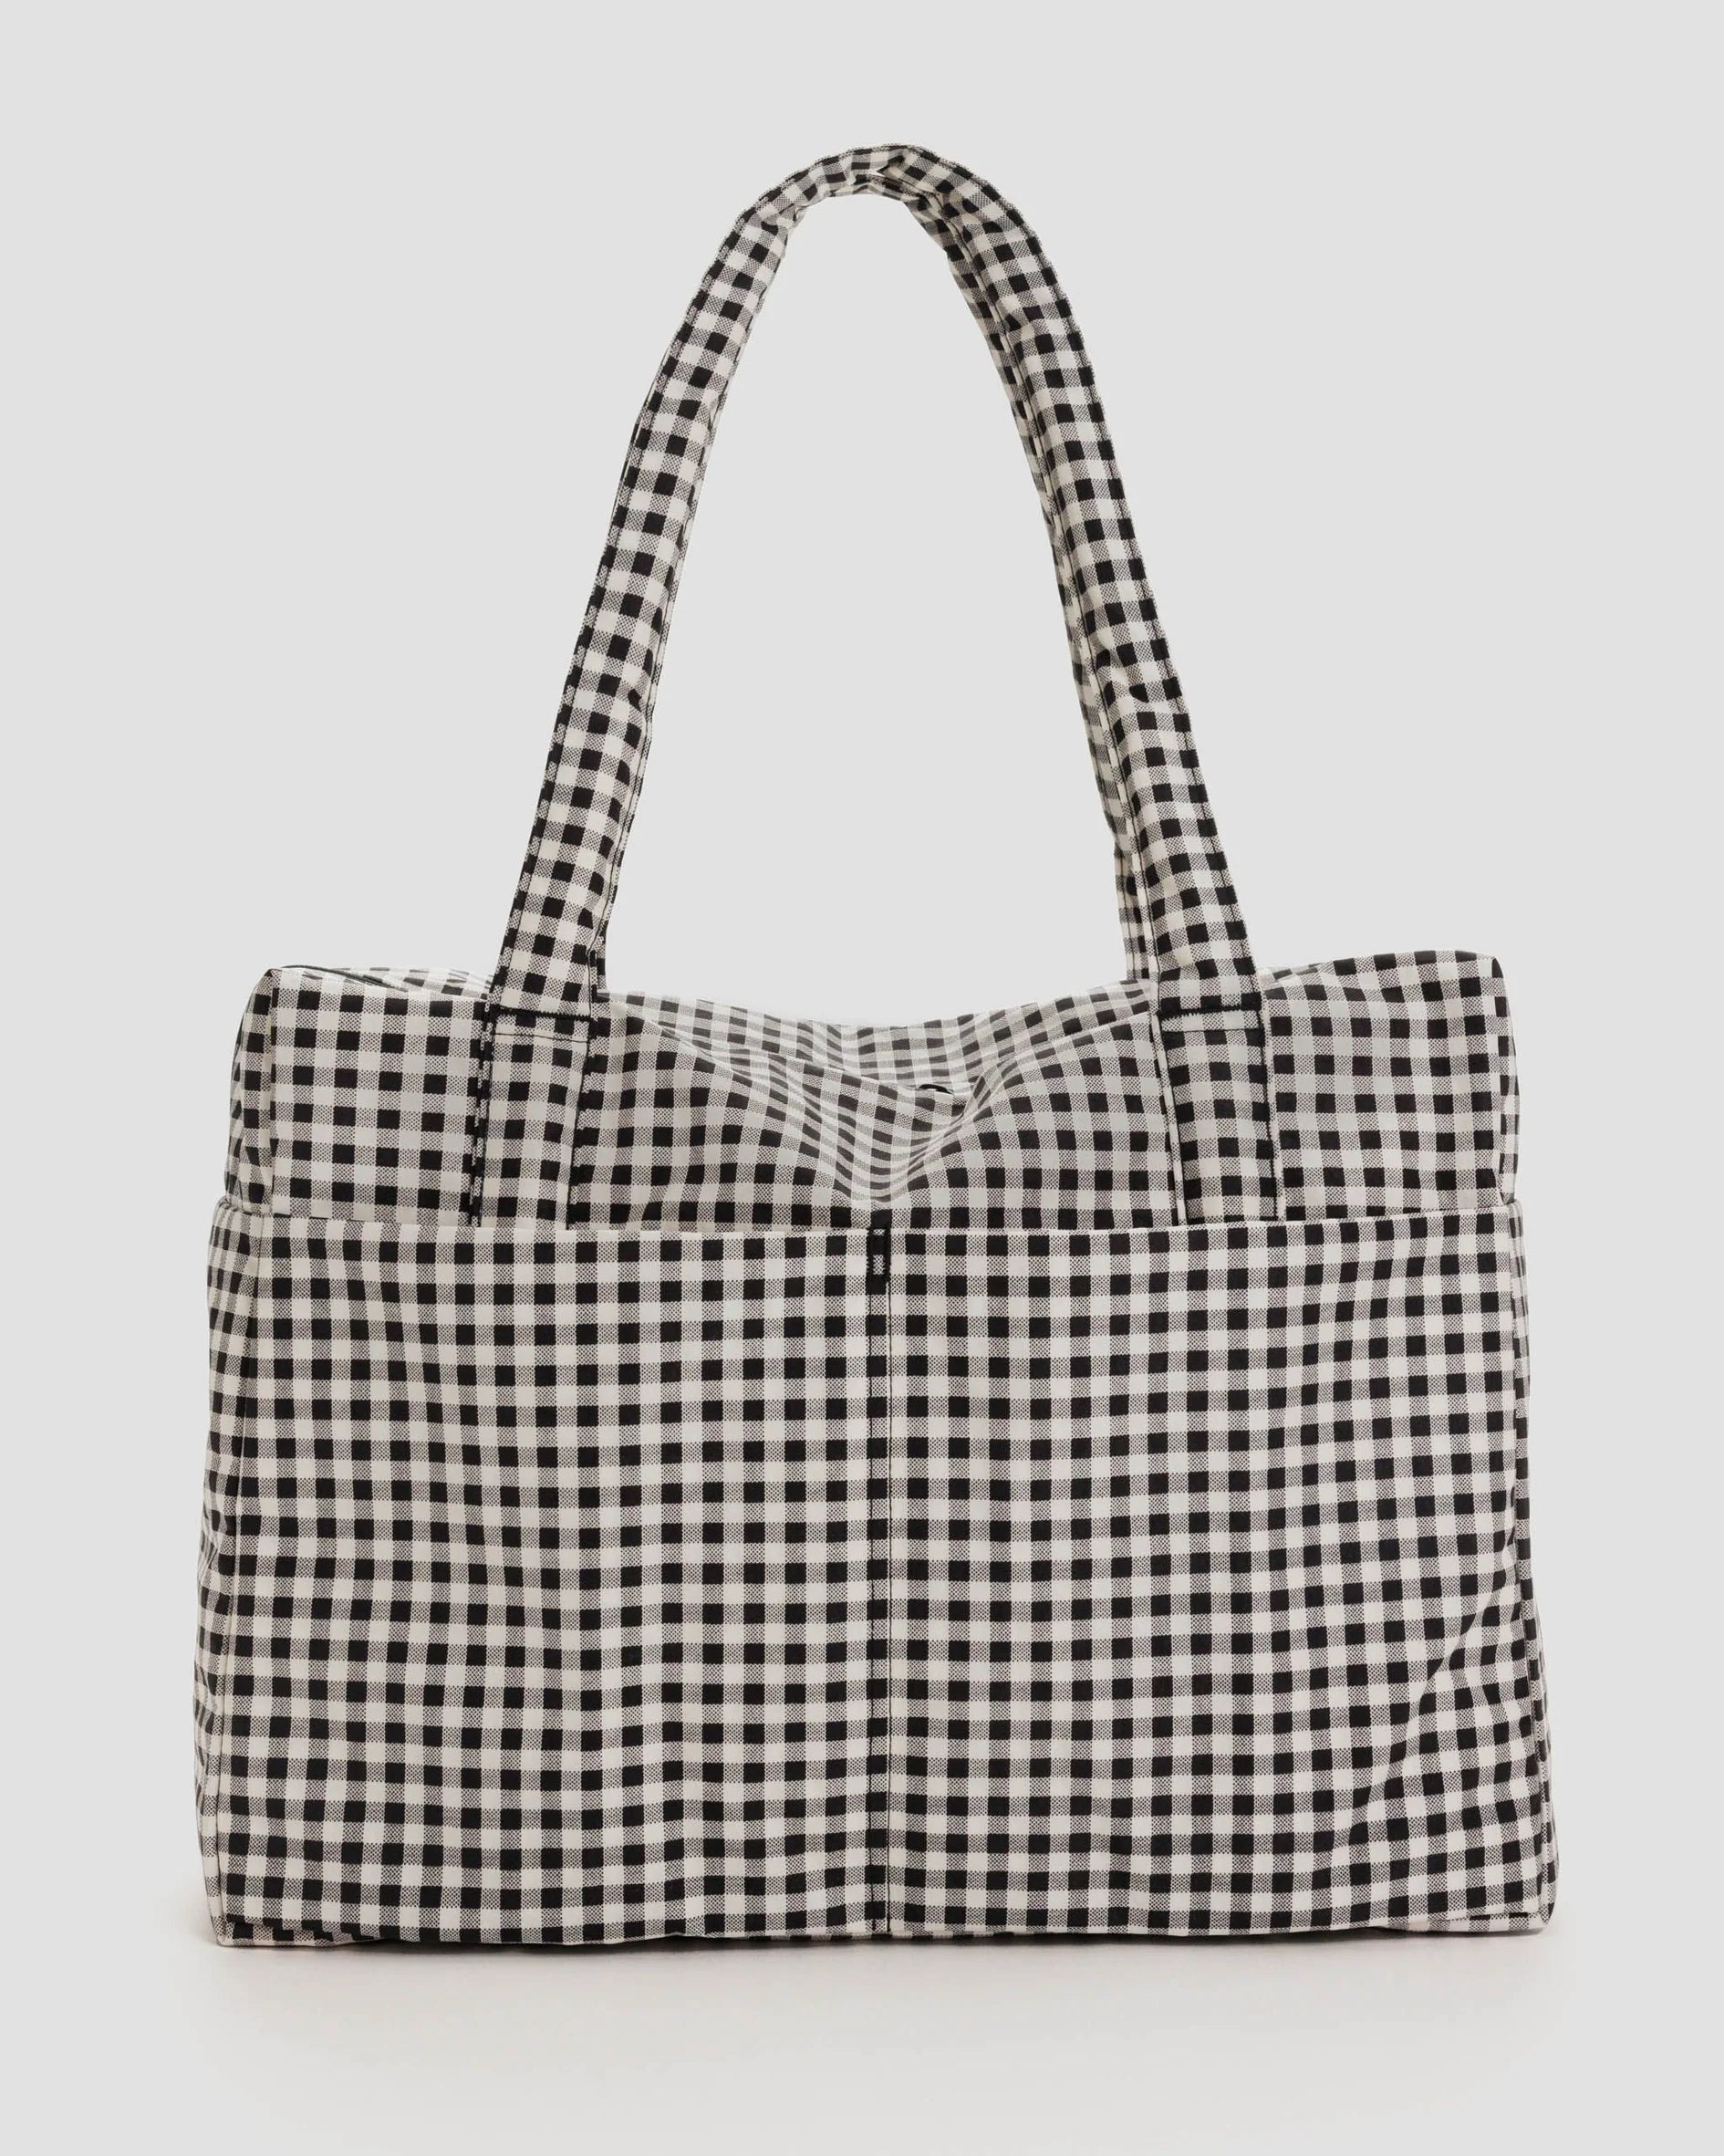 BAGGU Travel Carry-on Bag in black and white gingham